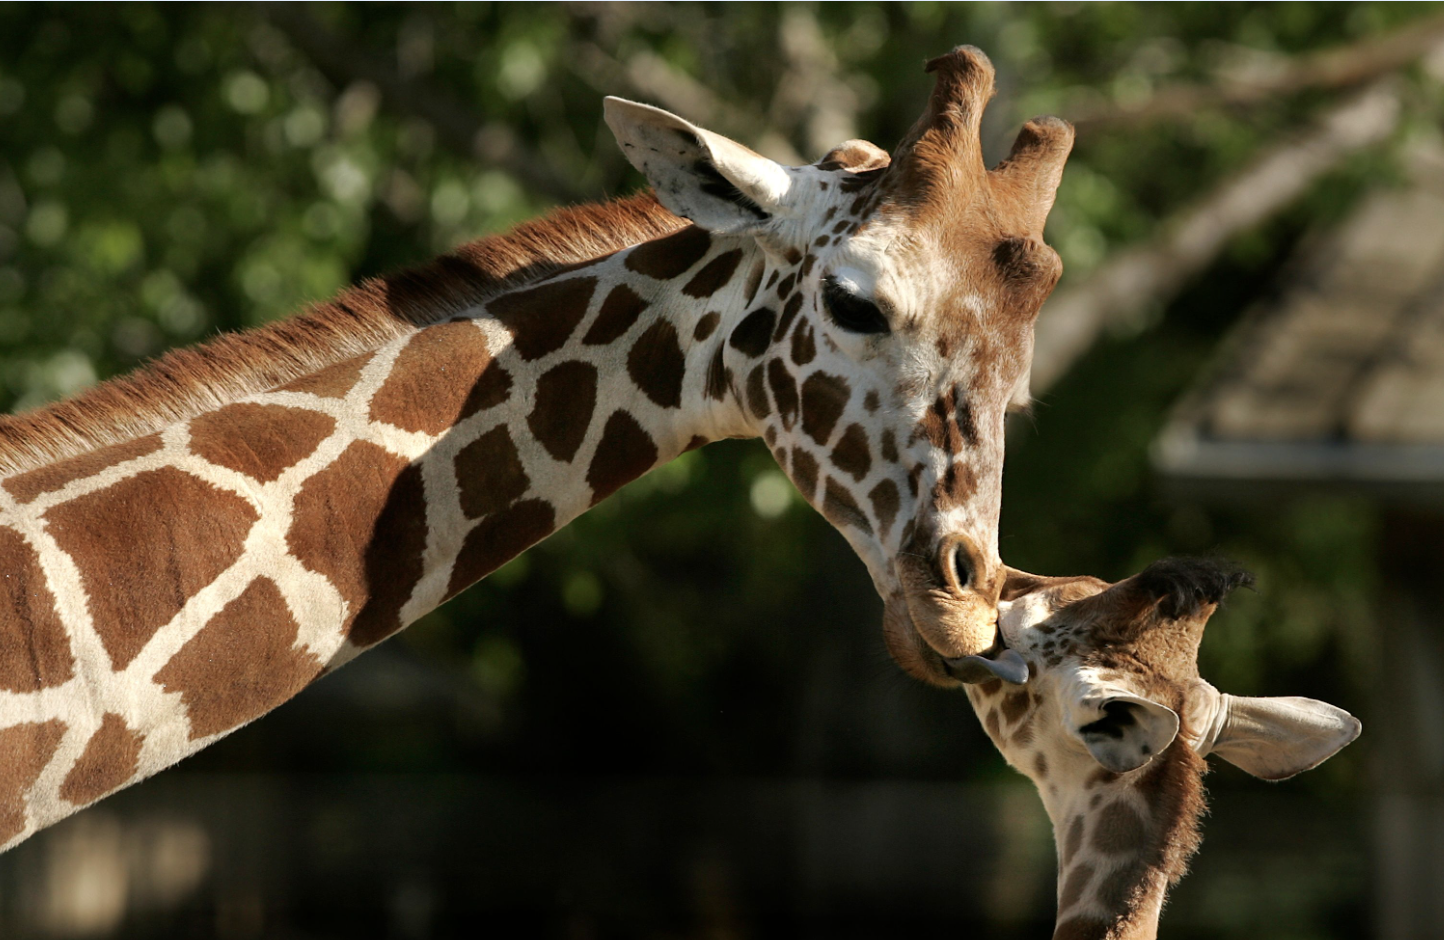 An adult giraffe leans down and licks the ear of its smaller offspring.